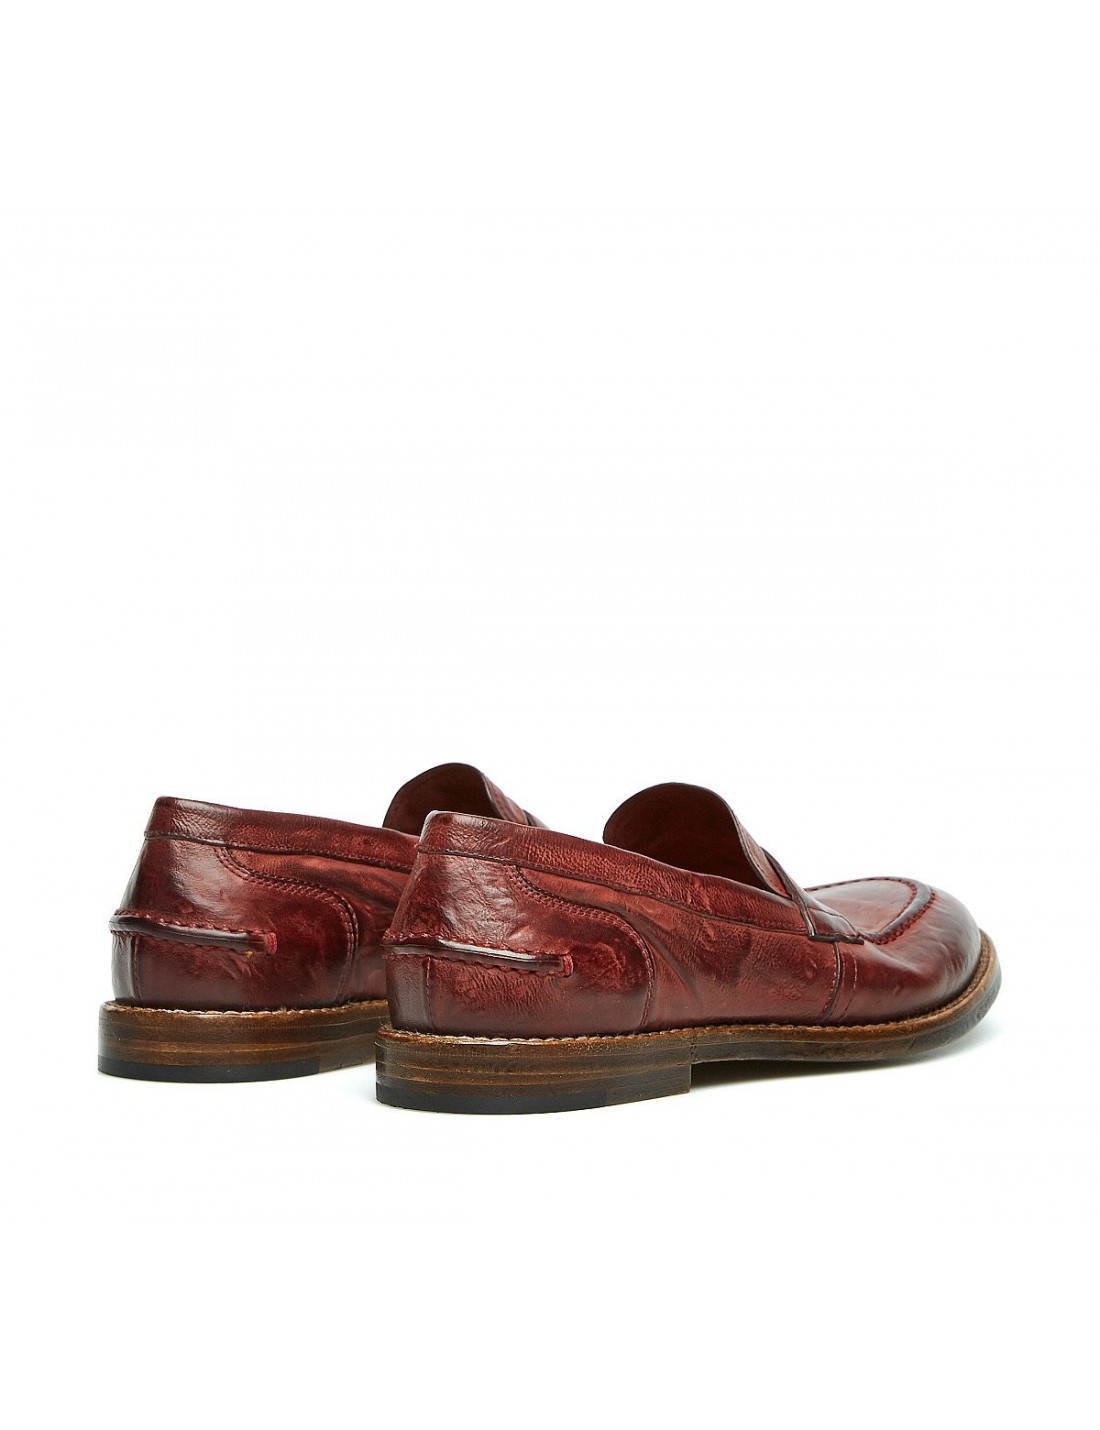 Vintage-style moccasins in calfskin with raised stitching and penny bar on the front - view 3